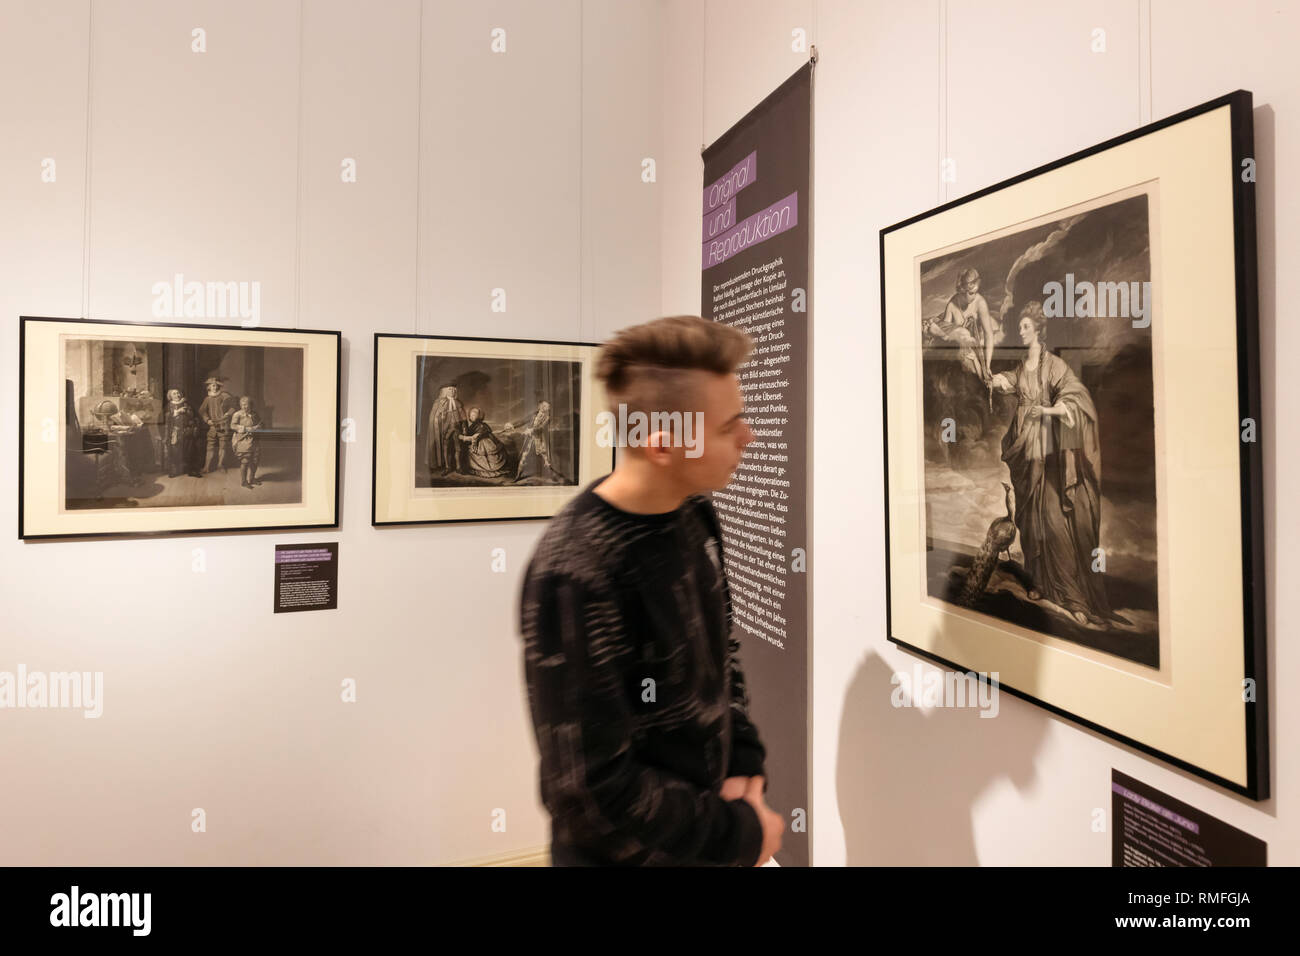 Gotha, Germany. 15th Feb, 2019. A man looks at the painting 'Lady Blake as Juno' by John Dixon in the exhibition 'The Fine English Art - Black Art from England' in the Herzogliches Museum. Until 12 May 2019, about 40 prints in mezzotint technique from the 17th and 18th centuries can be seen here. Credit: Michael Reichel/dpa/Alamy Live News Stock Photo